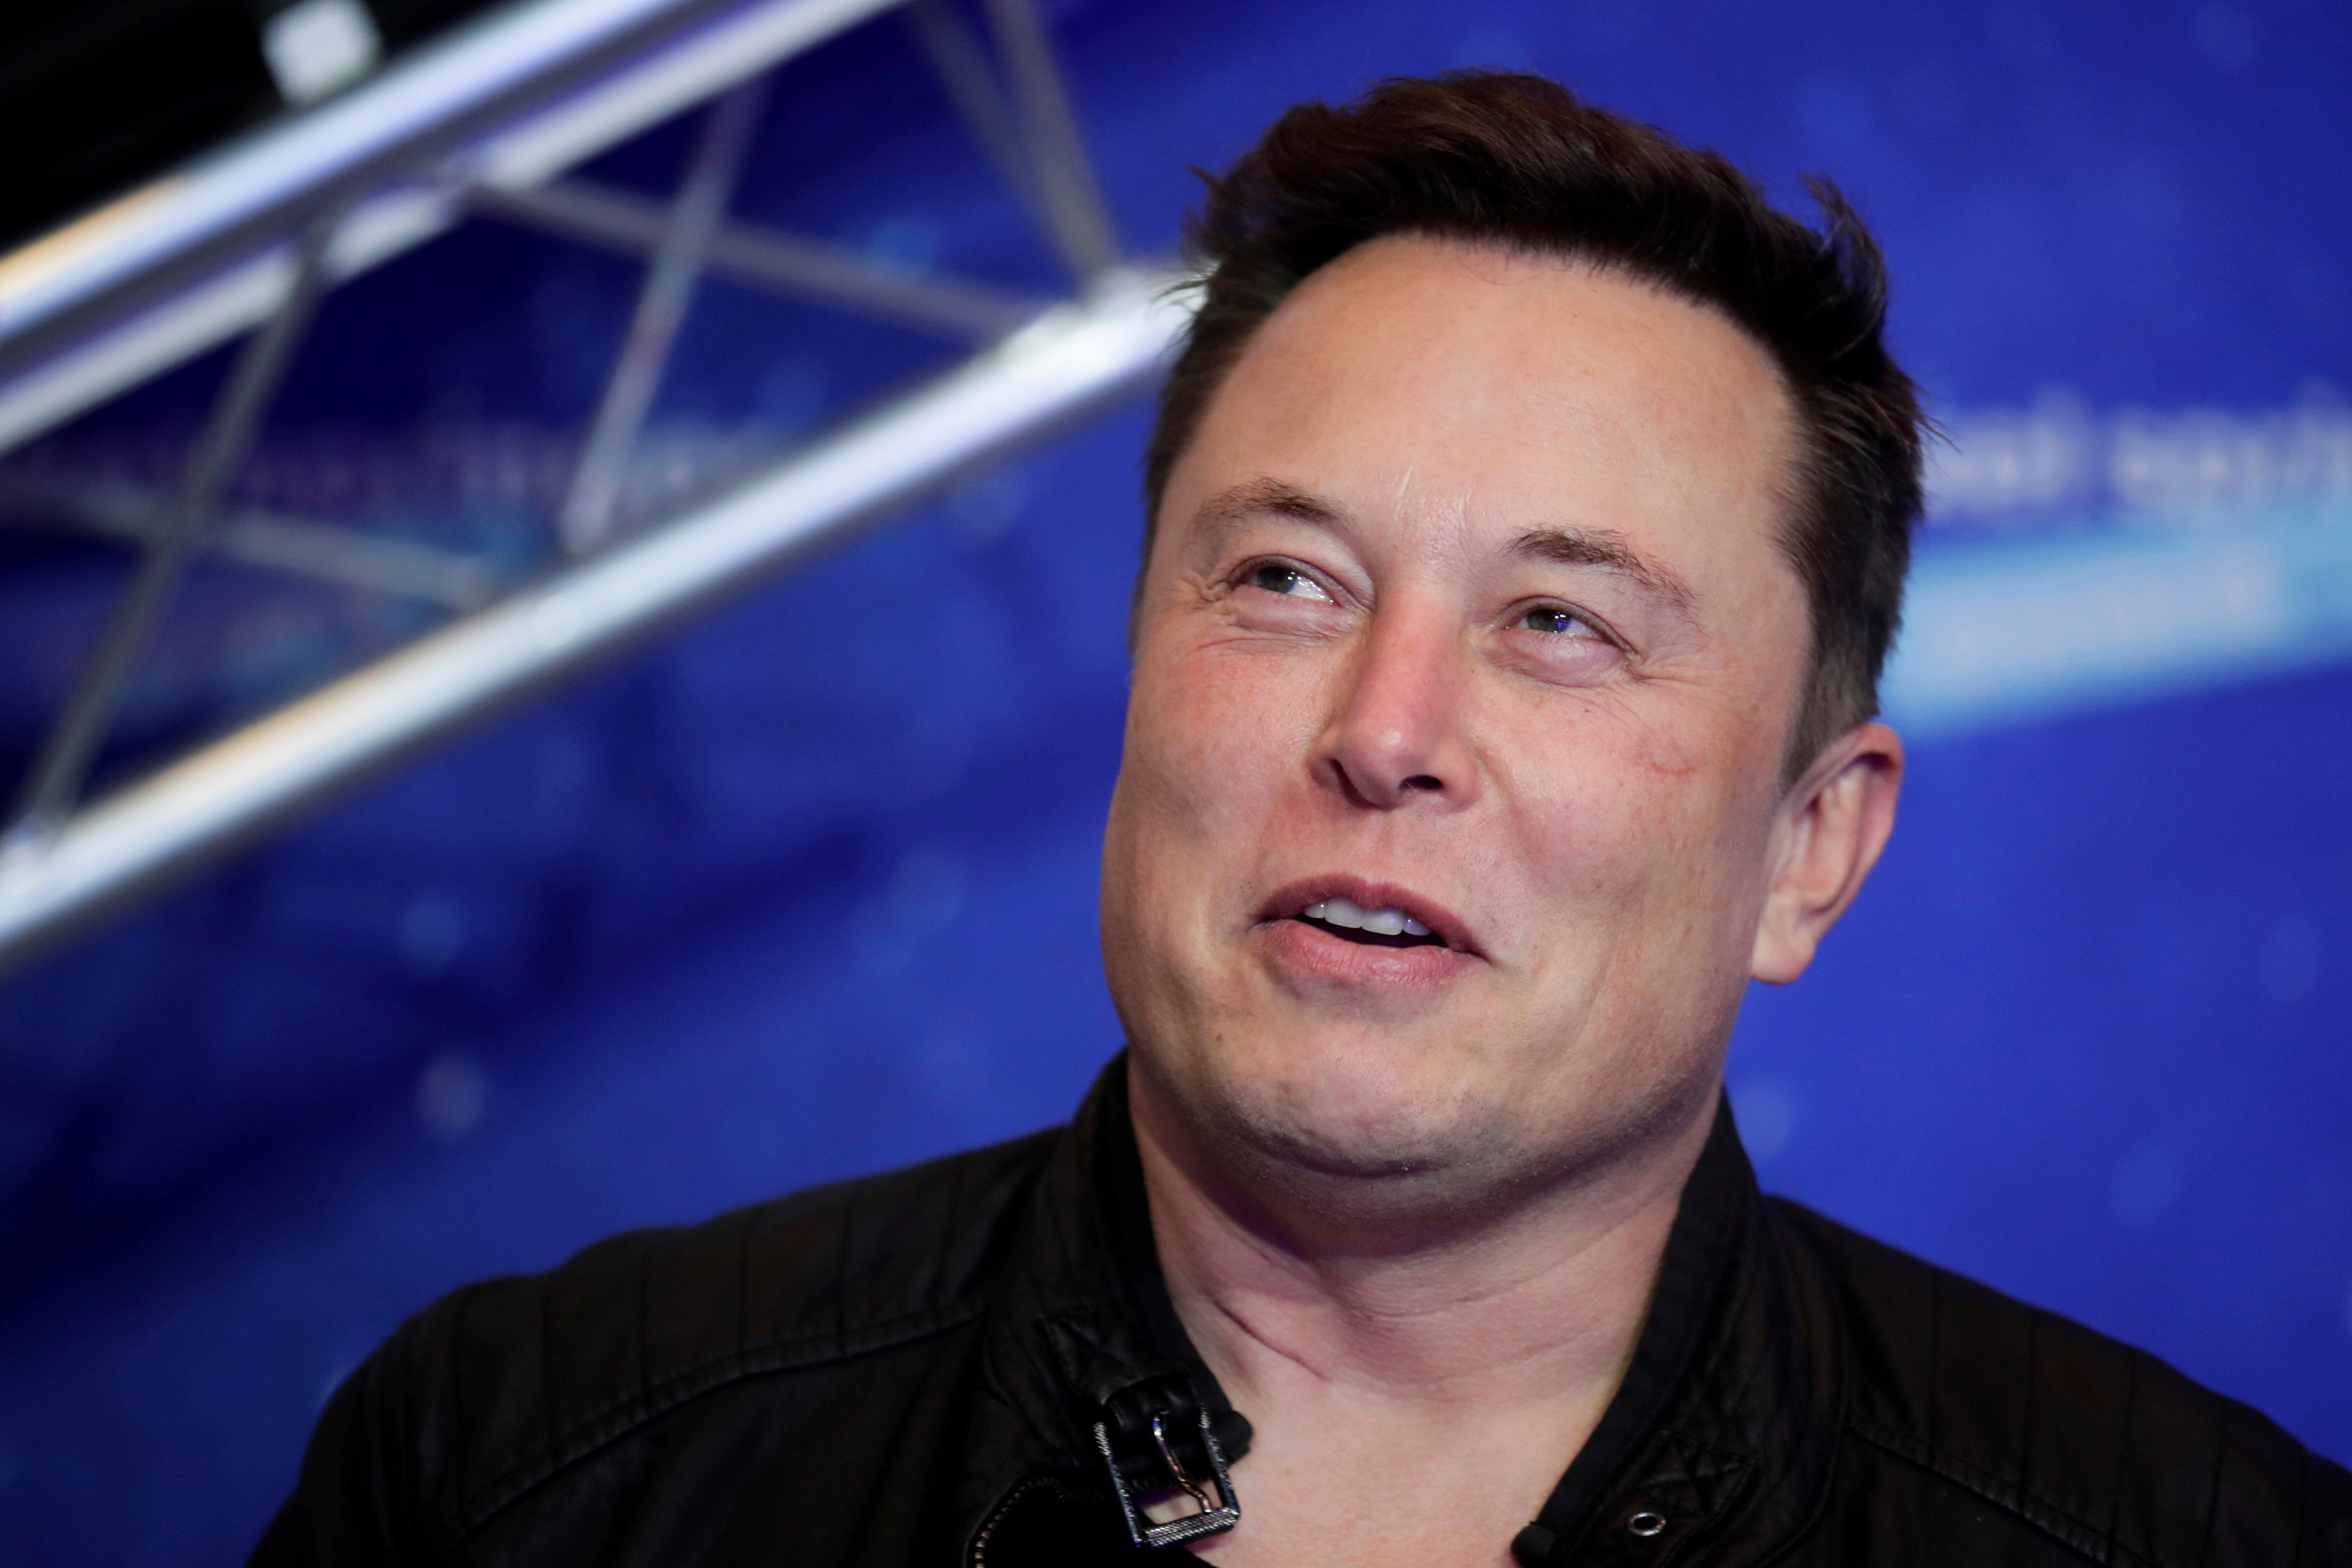 Elon Musk: the world’s richest man is trying to buy Twitter